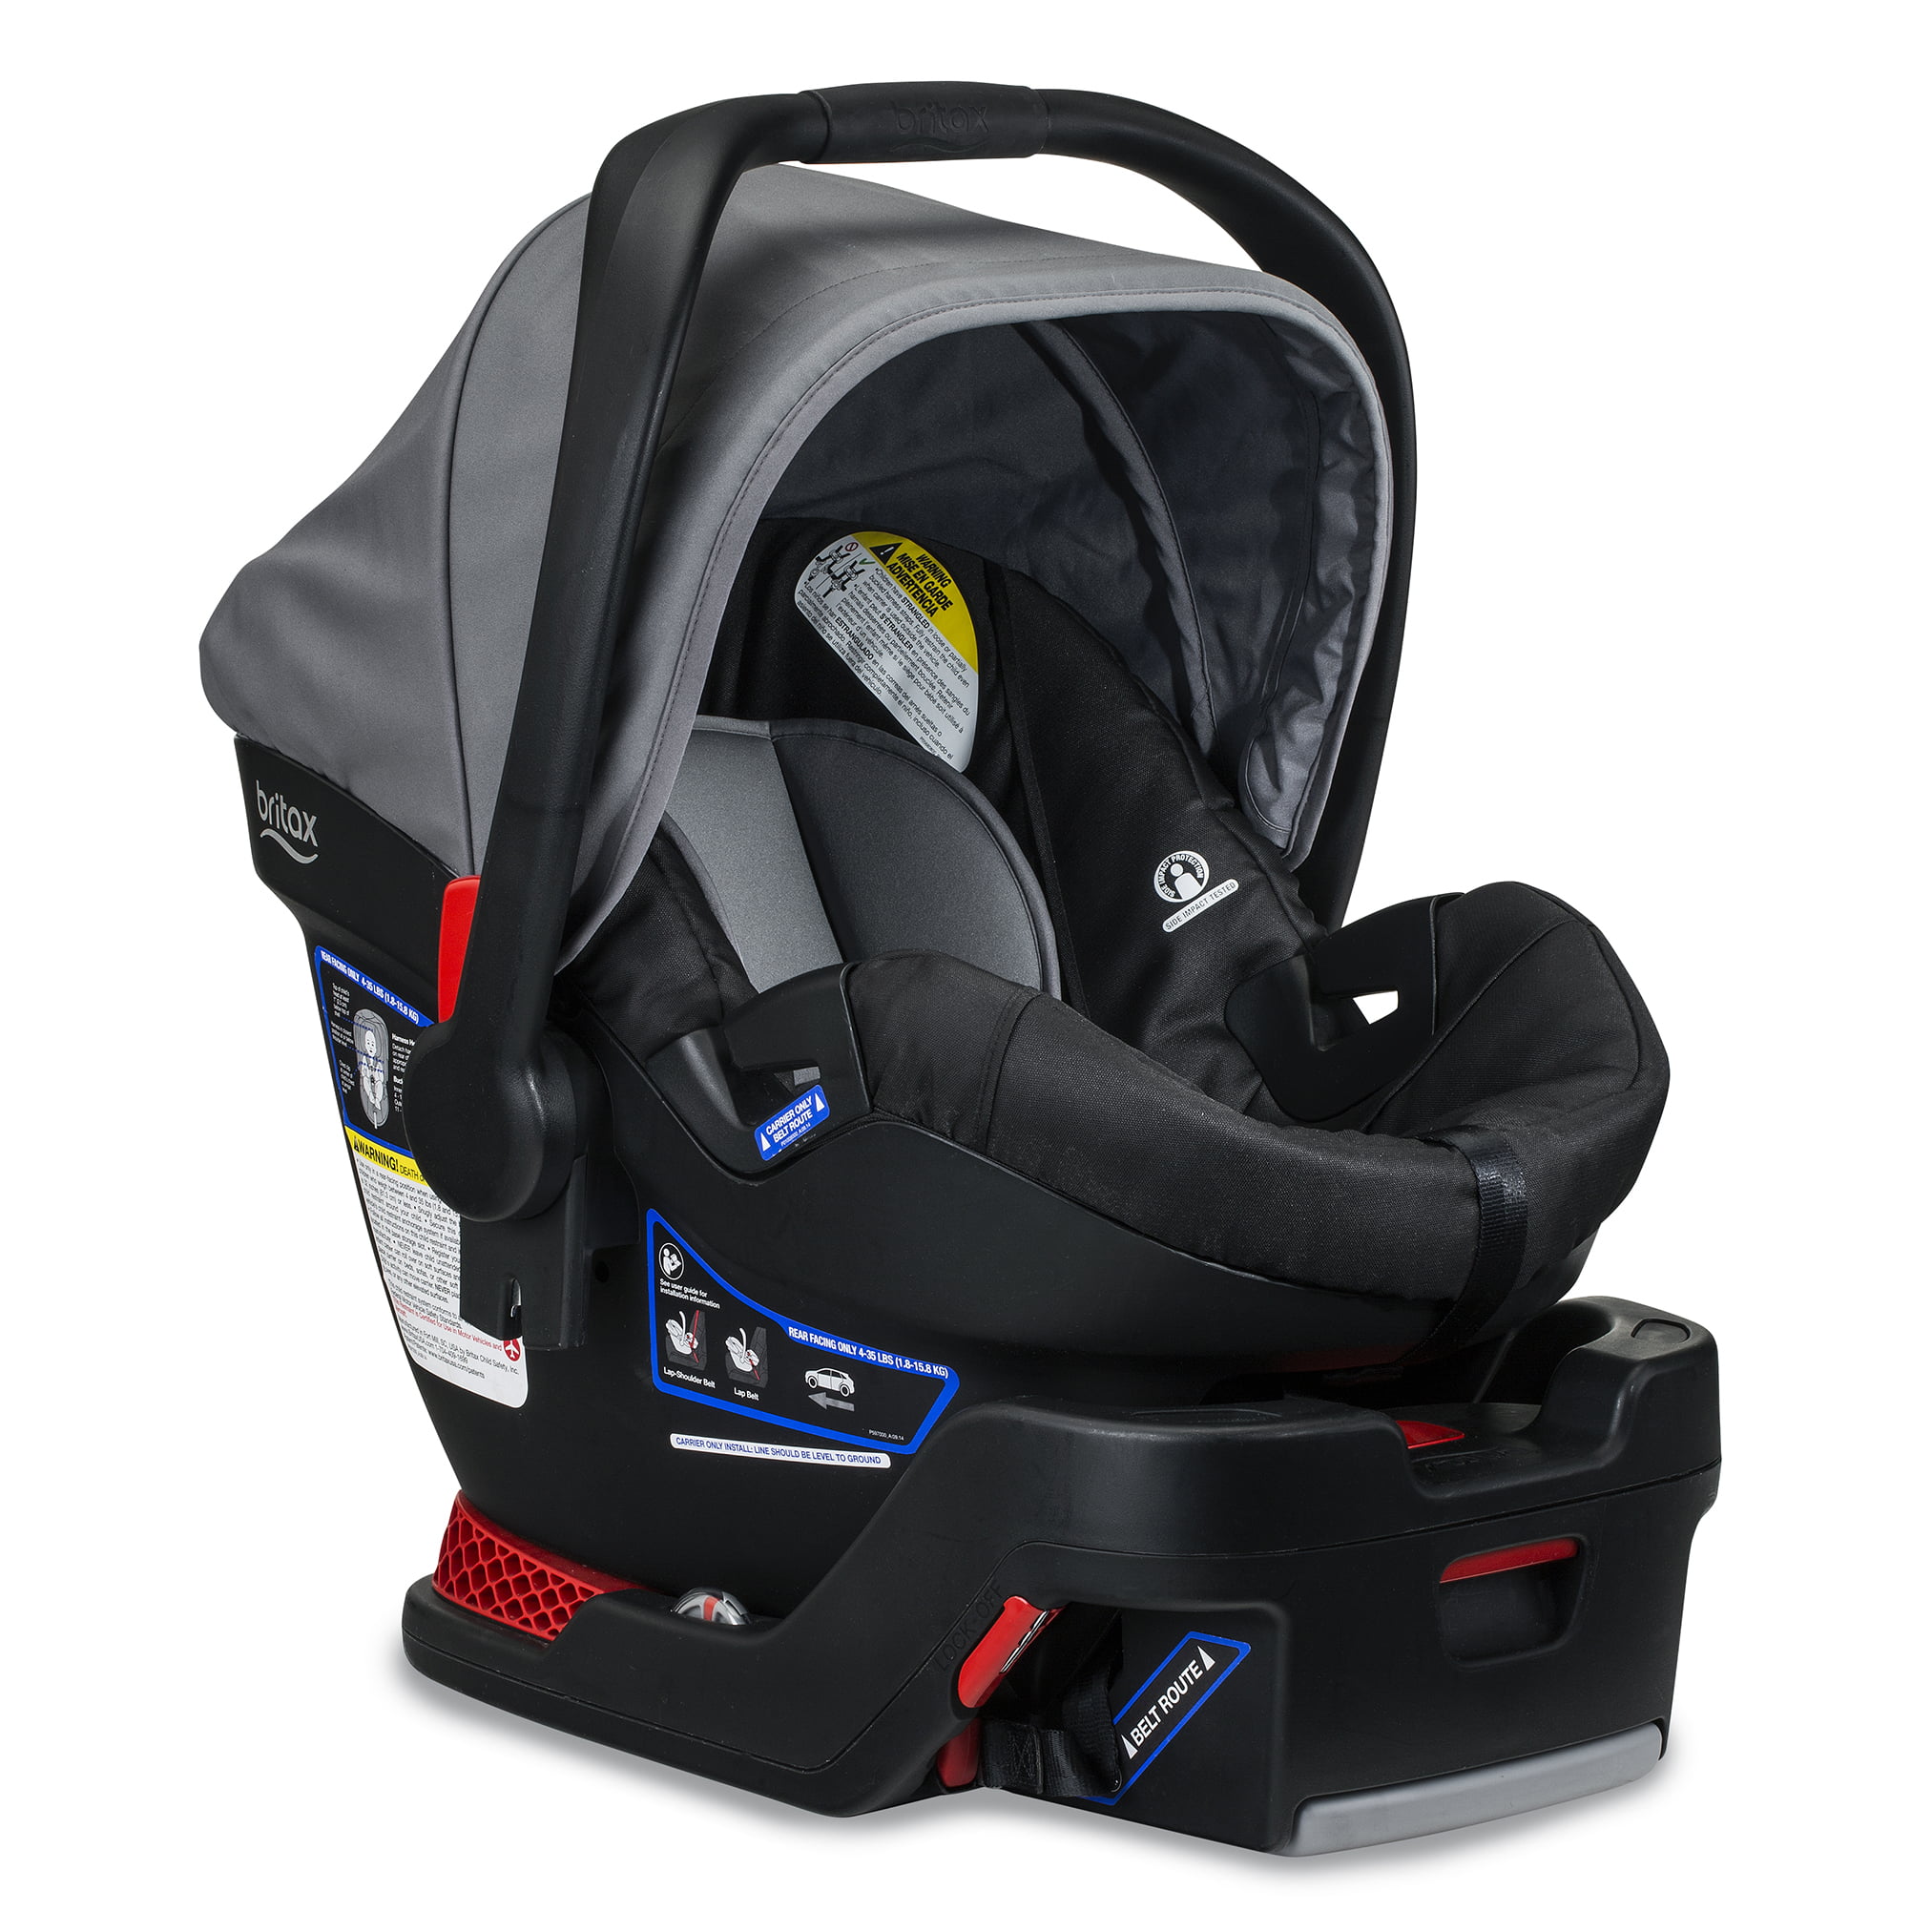 Further reading recommendations about Walmart Infant Car Seats{null}